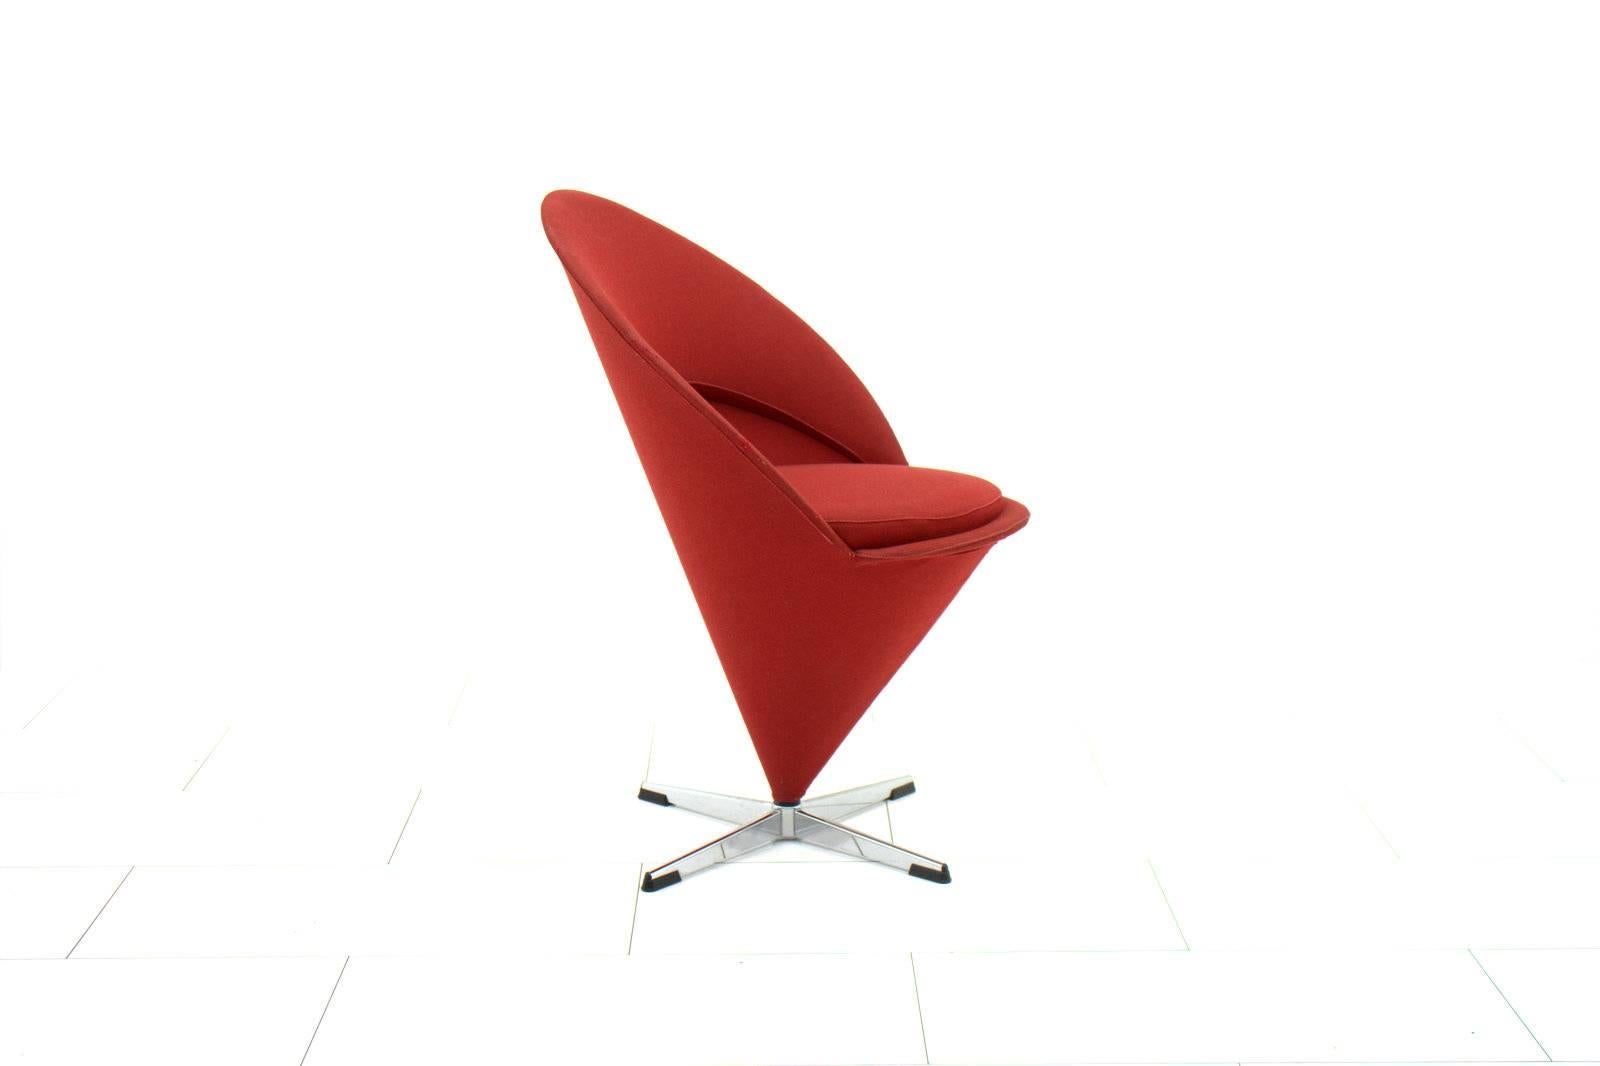 Red cone chairs by Verner Panton, Denmark, 1958.
Good condition with small signs of usage.

Worldwide shipping.

